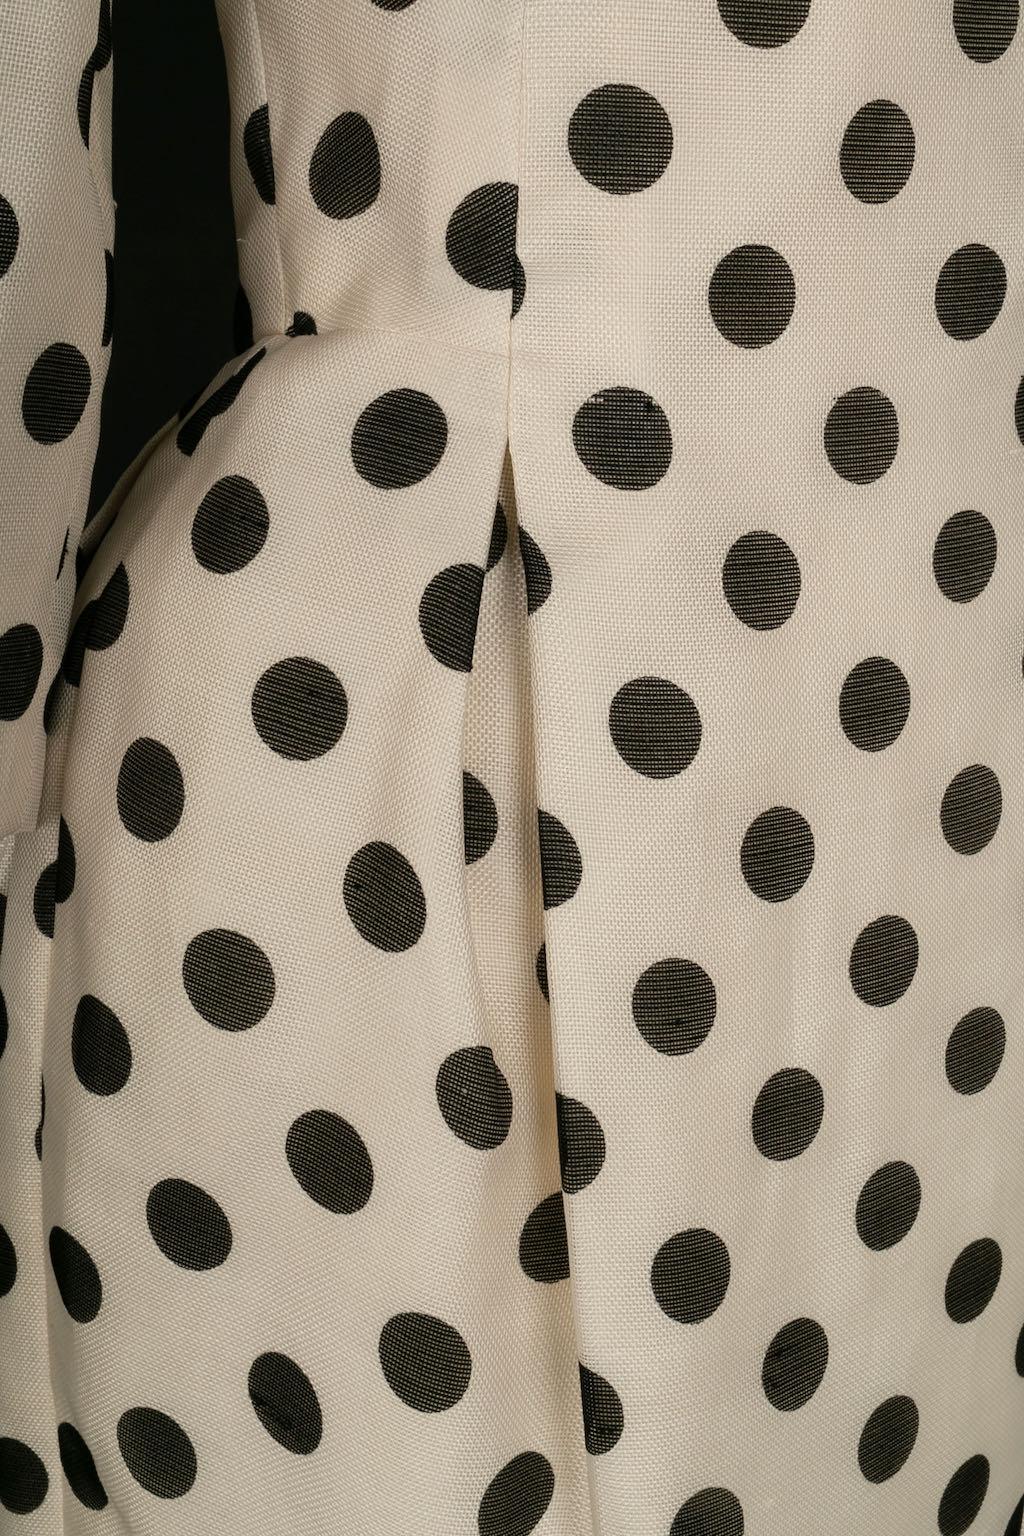 Women's Christian Dior Haute Couture White Canvas with Dots Dress For Sale